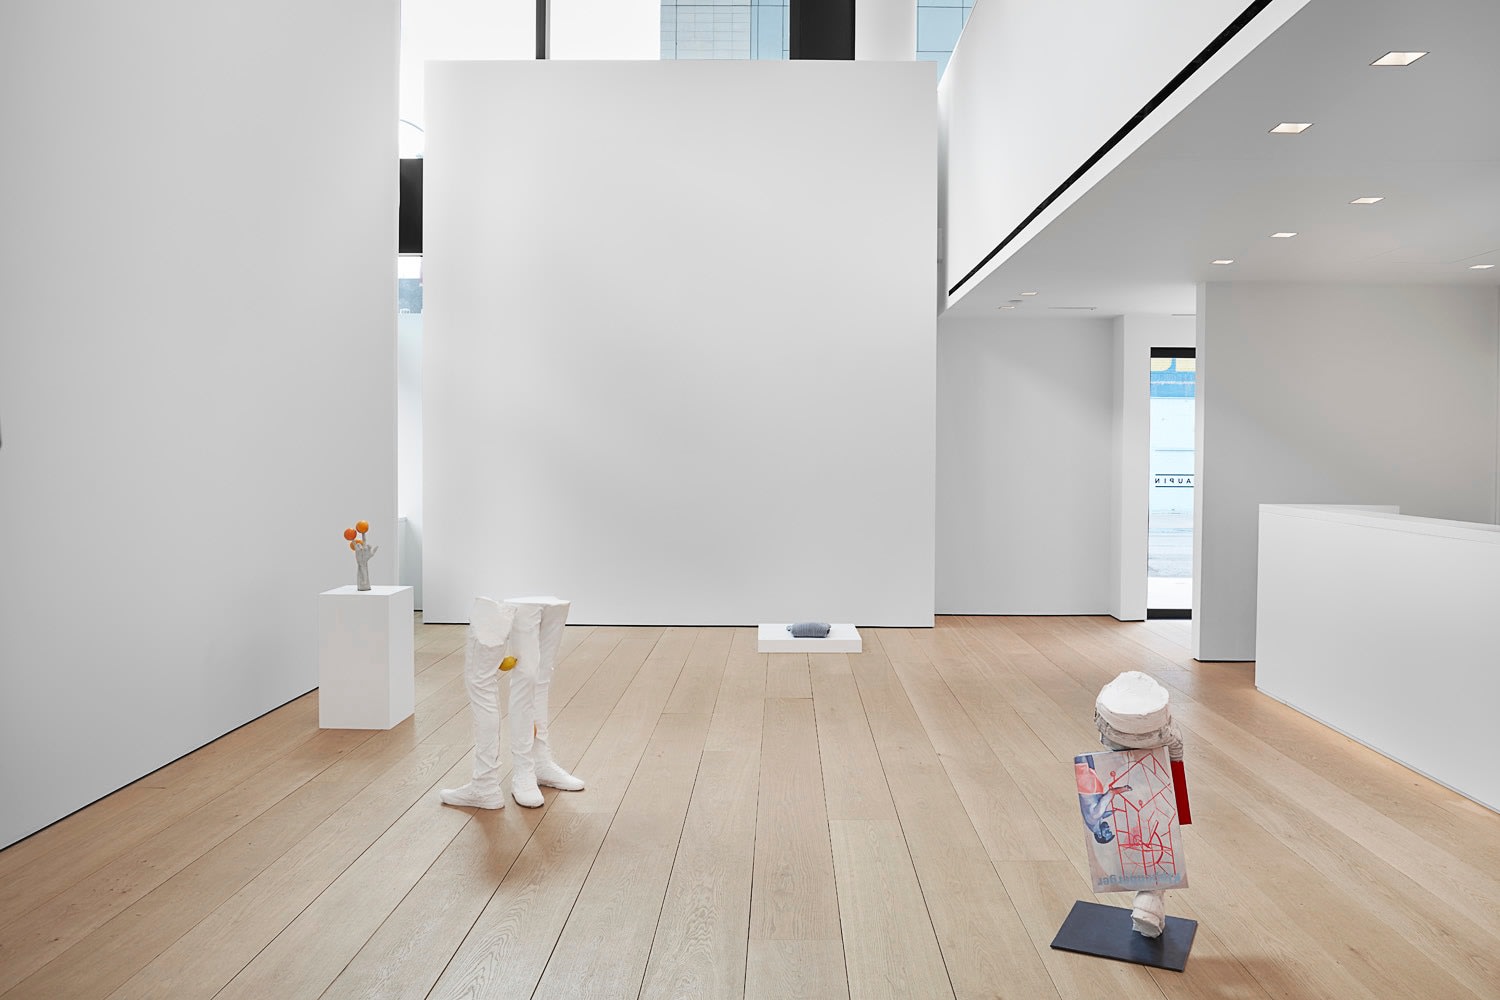 Installation view of Erwin Wurm's exhibition Yes Biological at Lehmann Maupin, New York, 2020, View 3